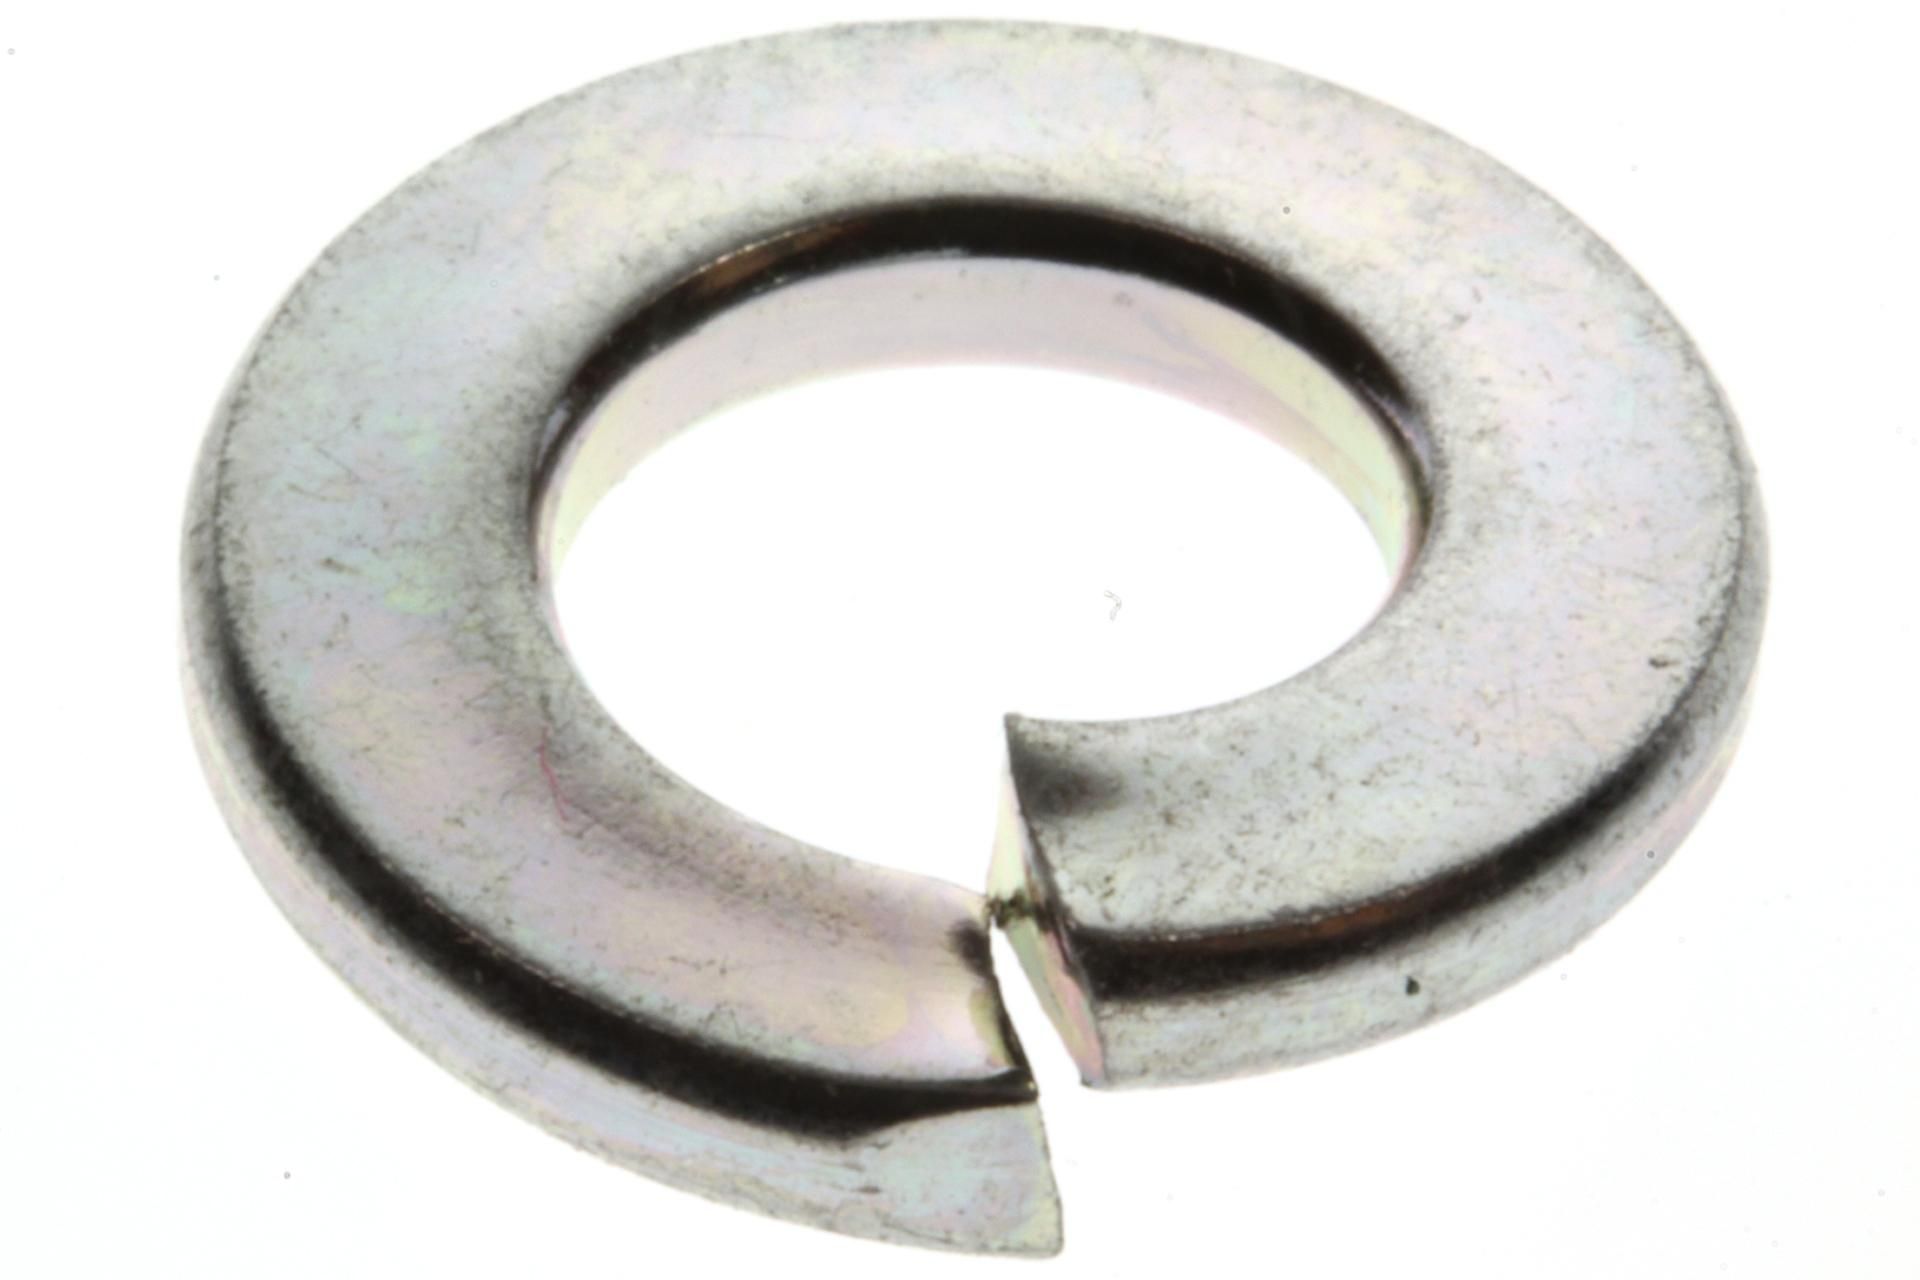 00000-00034 Superseded by 94111-06000 - WASHER, SPRING (6MM)